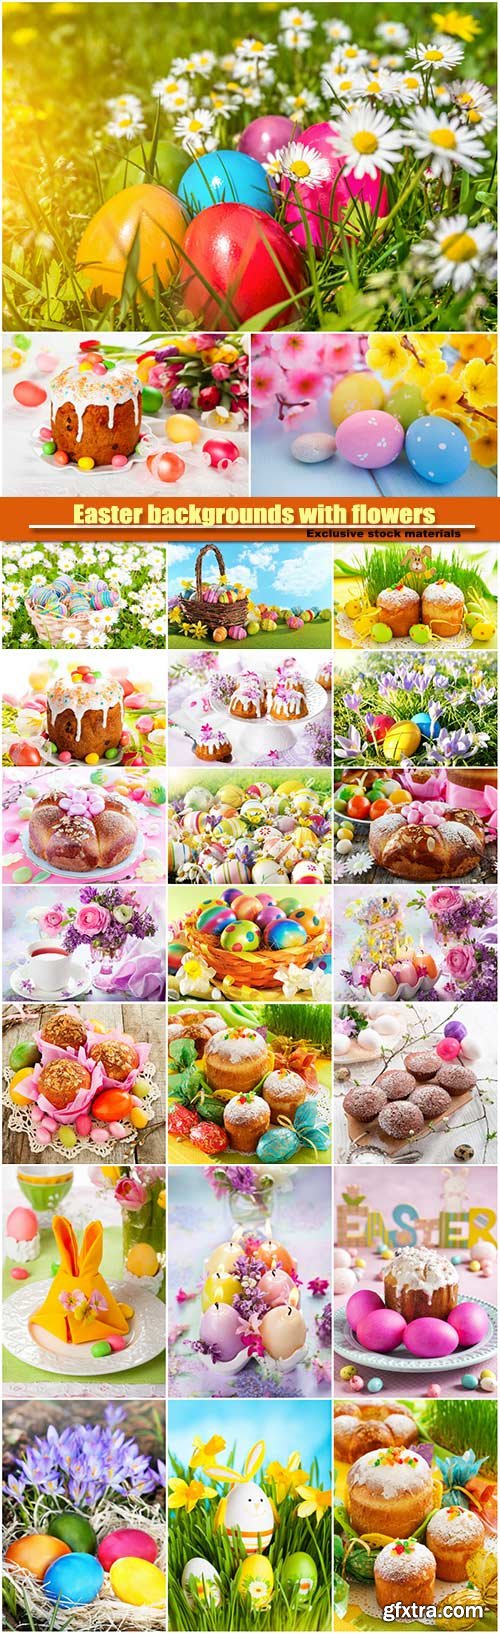 Easter backgrounds with flowers and easter eggs